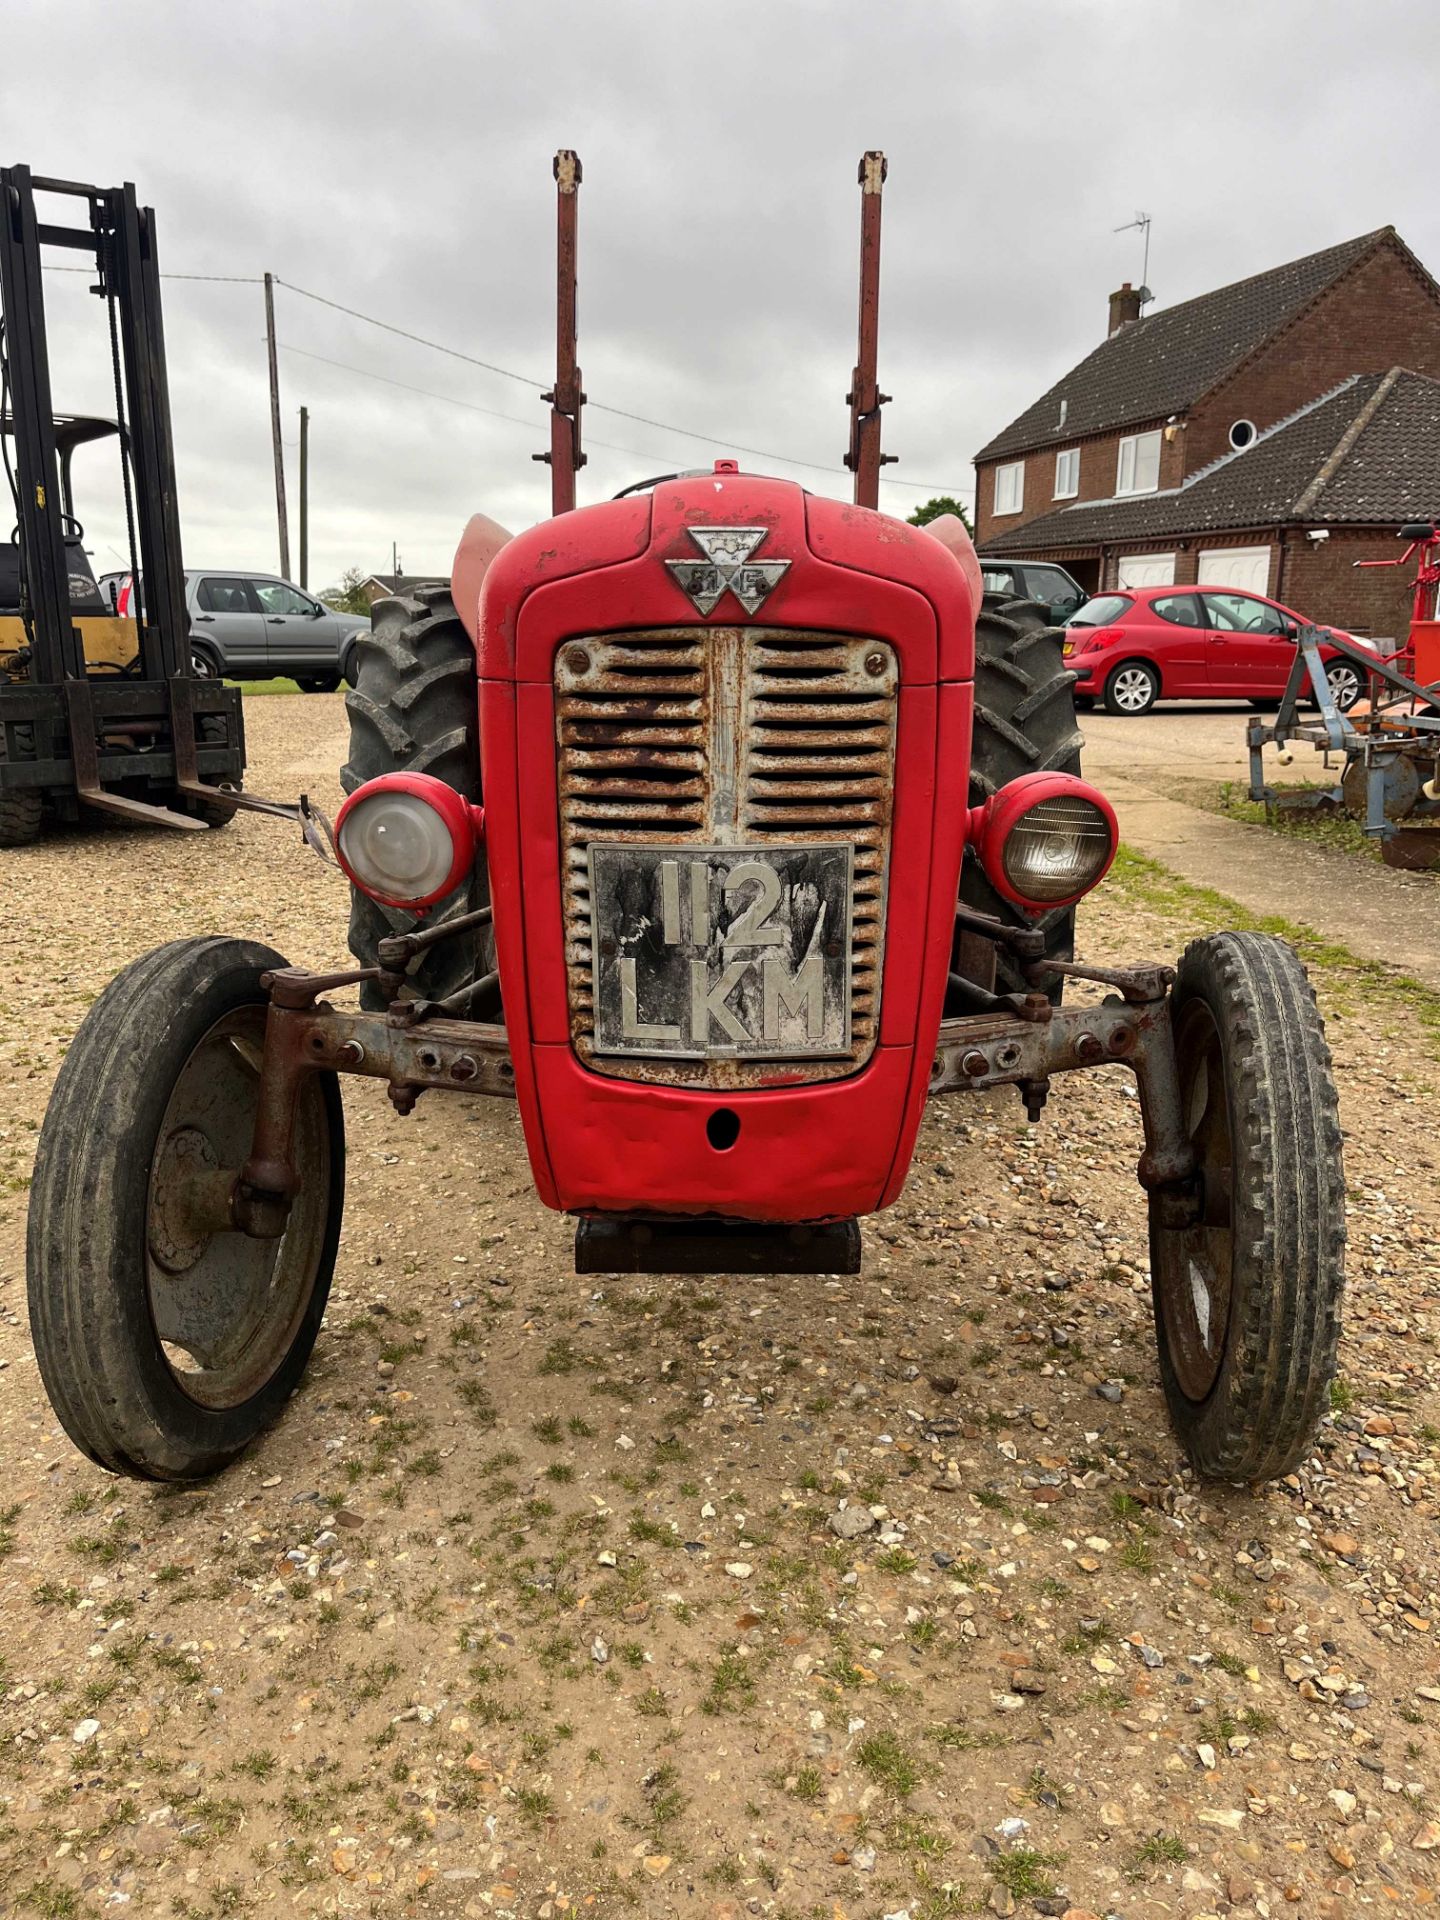 1960 Massey Ferguson 35 orchard tractor, 8000hrs with underslung exhaust system - Image 2 of 5